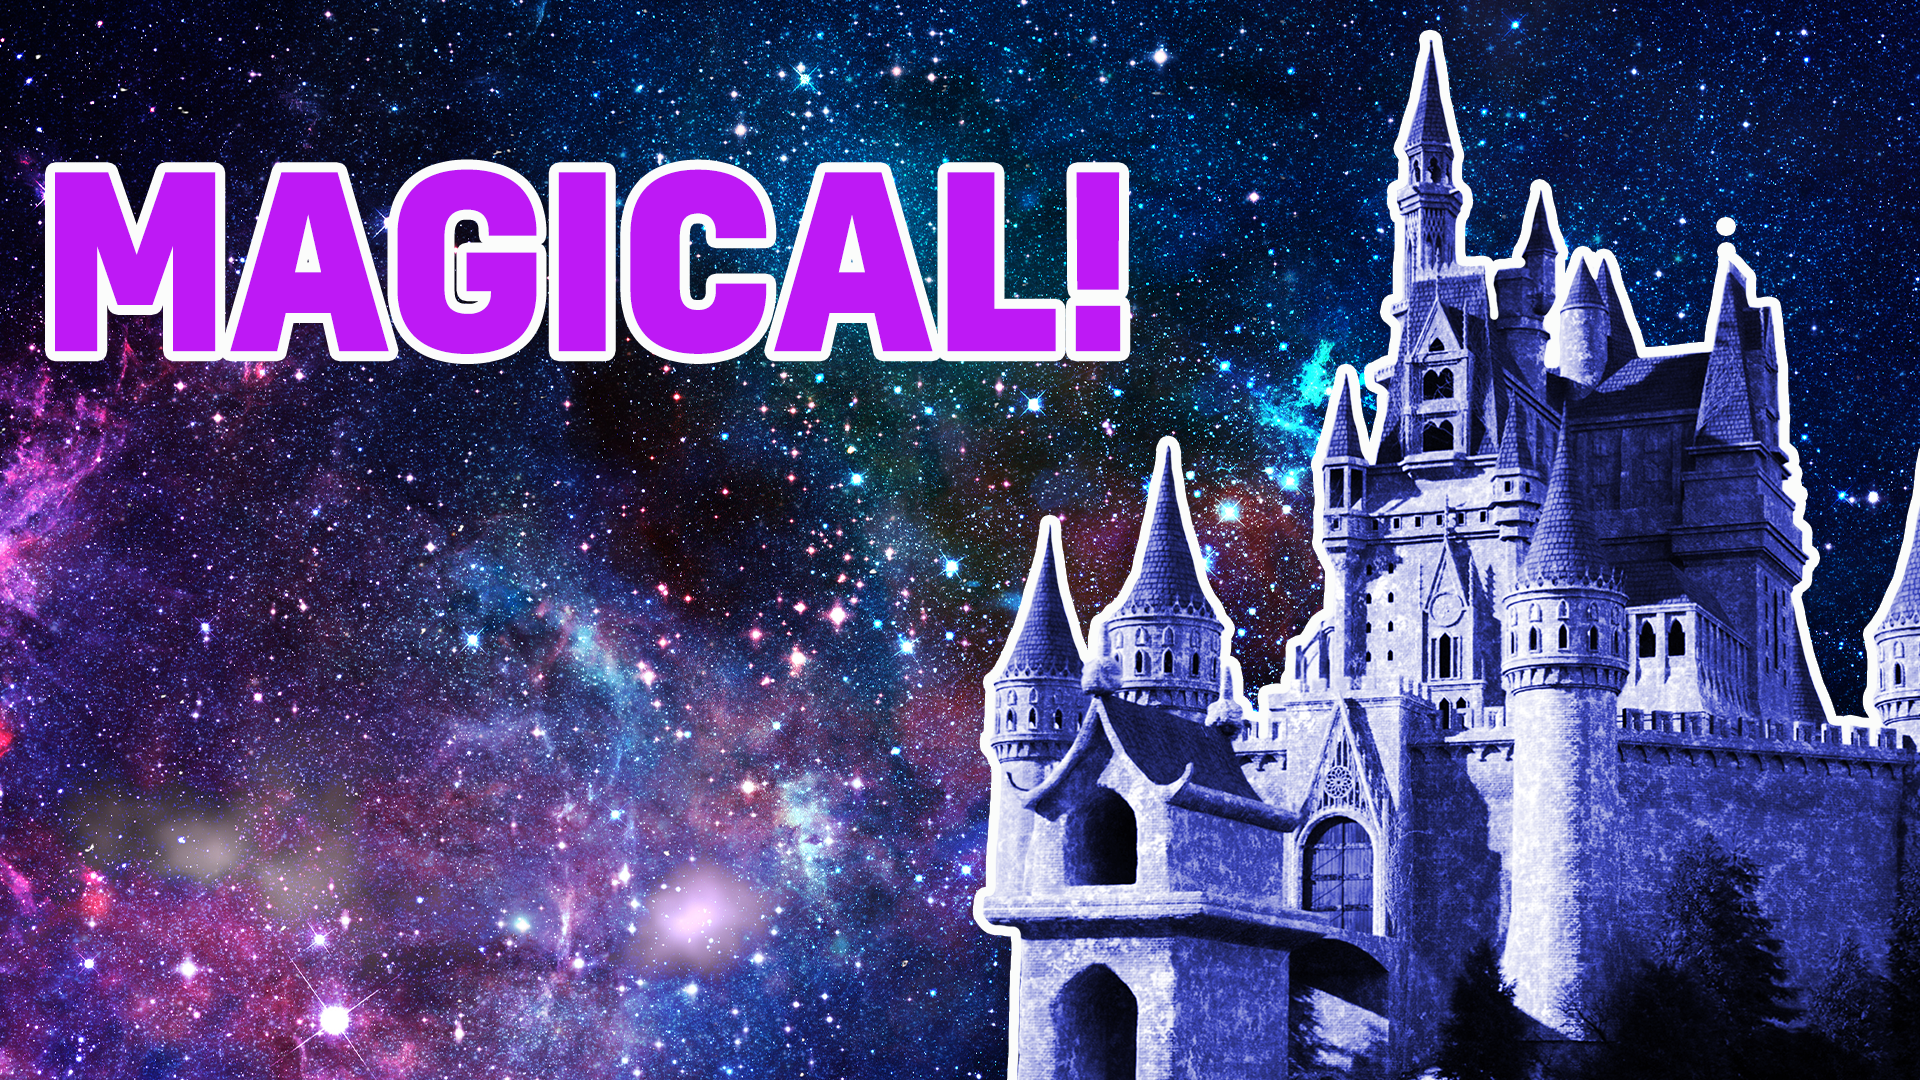 Woah! You managed to get 100% on this Disney Dreamlight quiz! Incredible! Why not share your result with your mates and let them know how well you did!